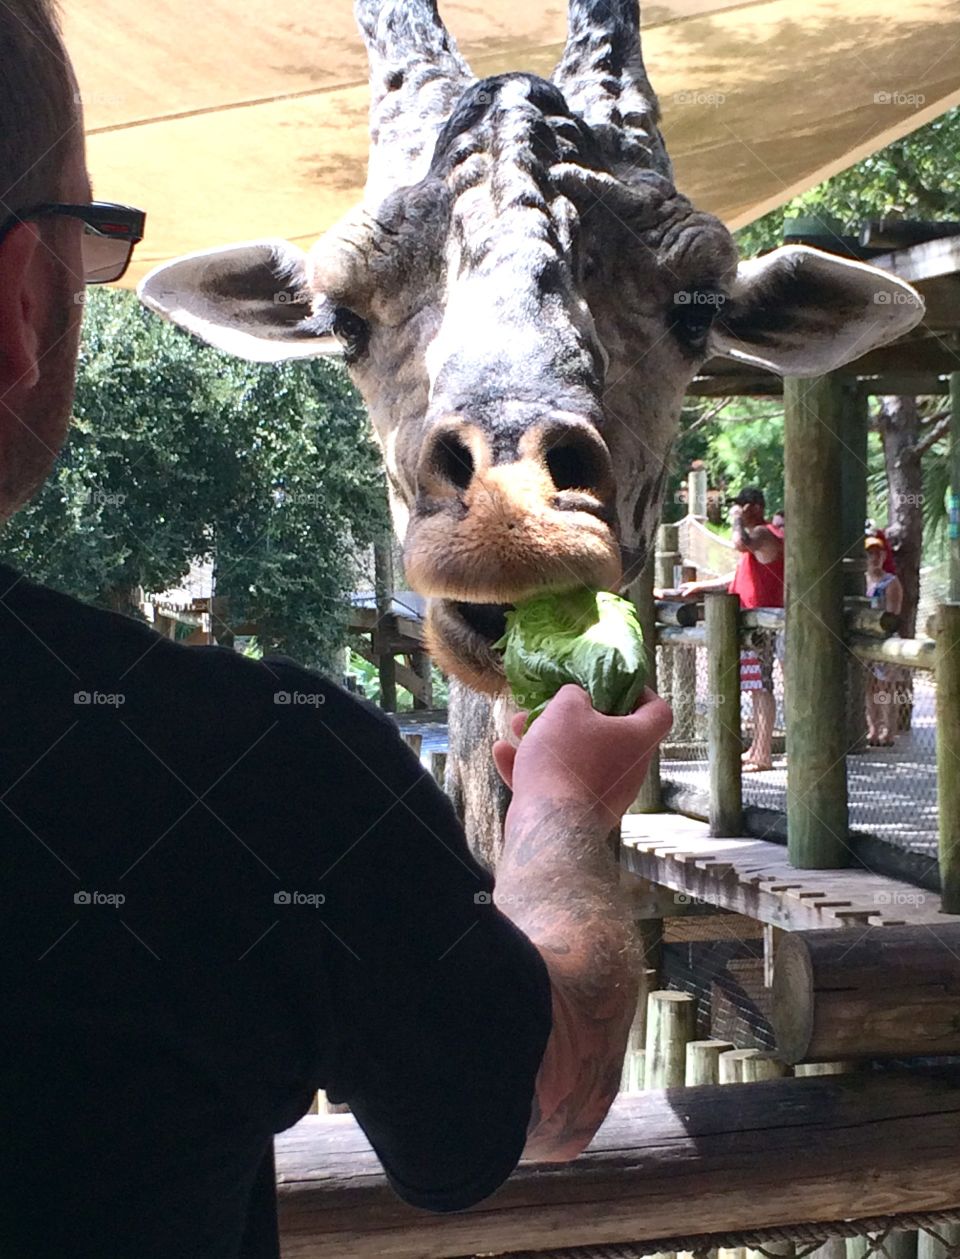 Bevard zoo in Florida is a great place to feed the giraffes. 